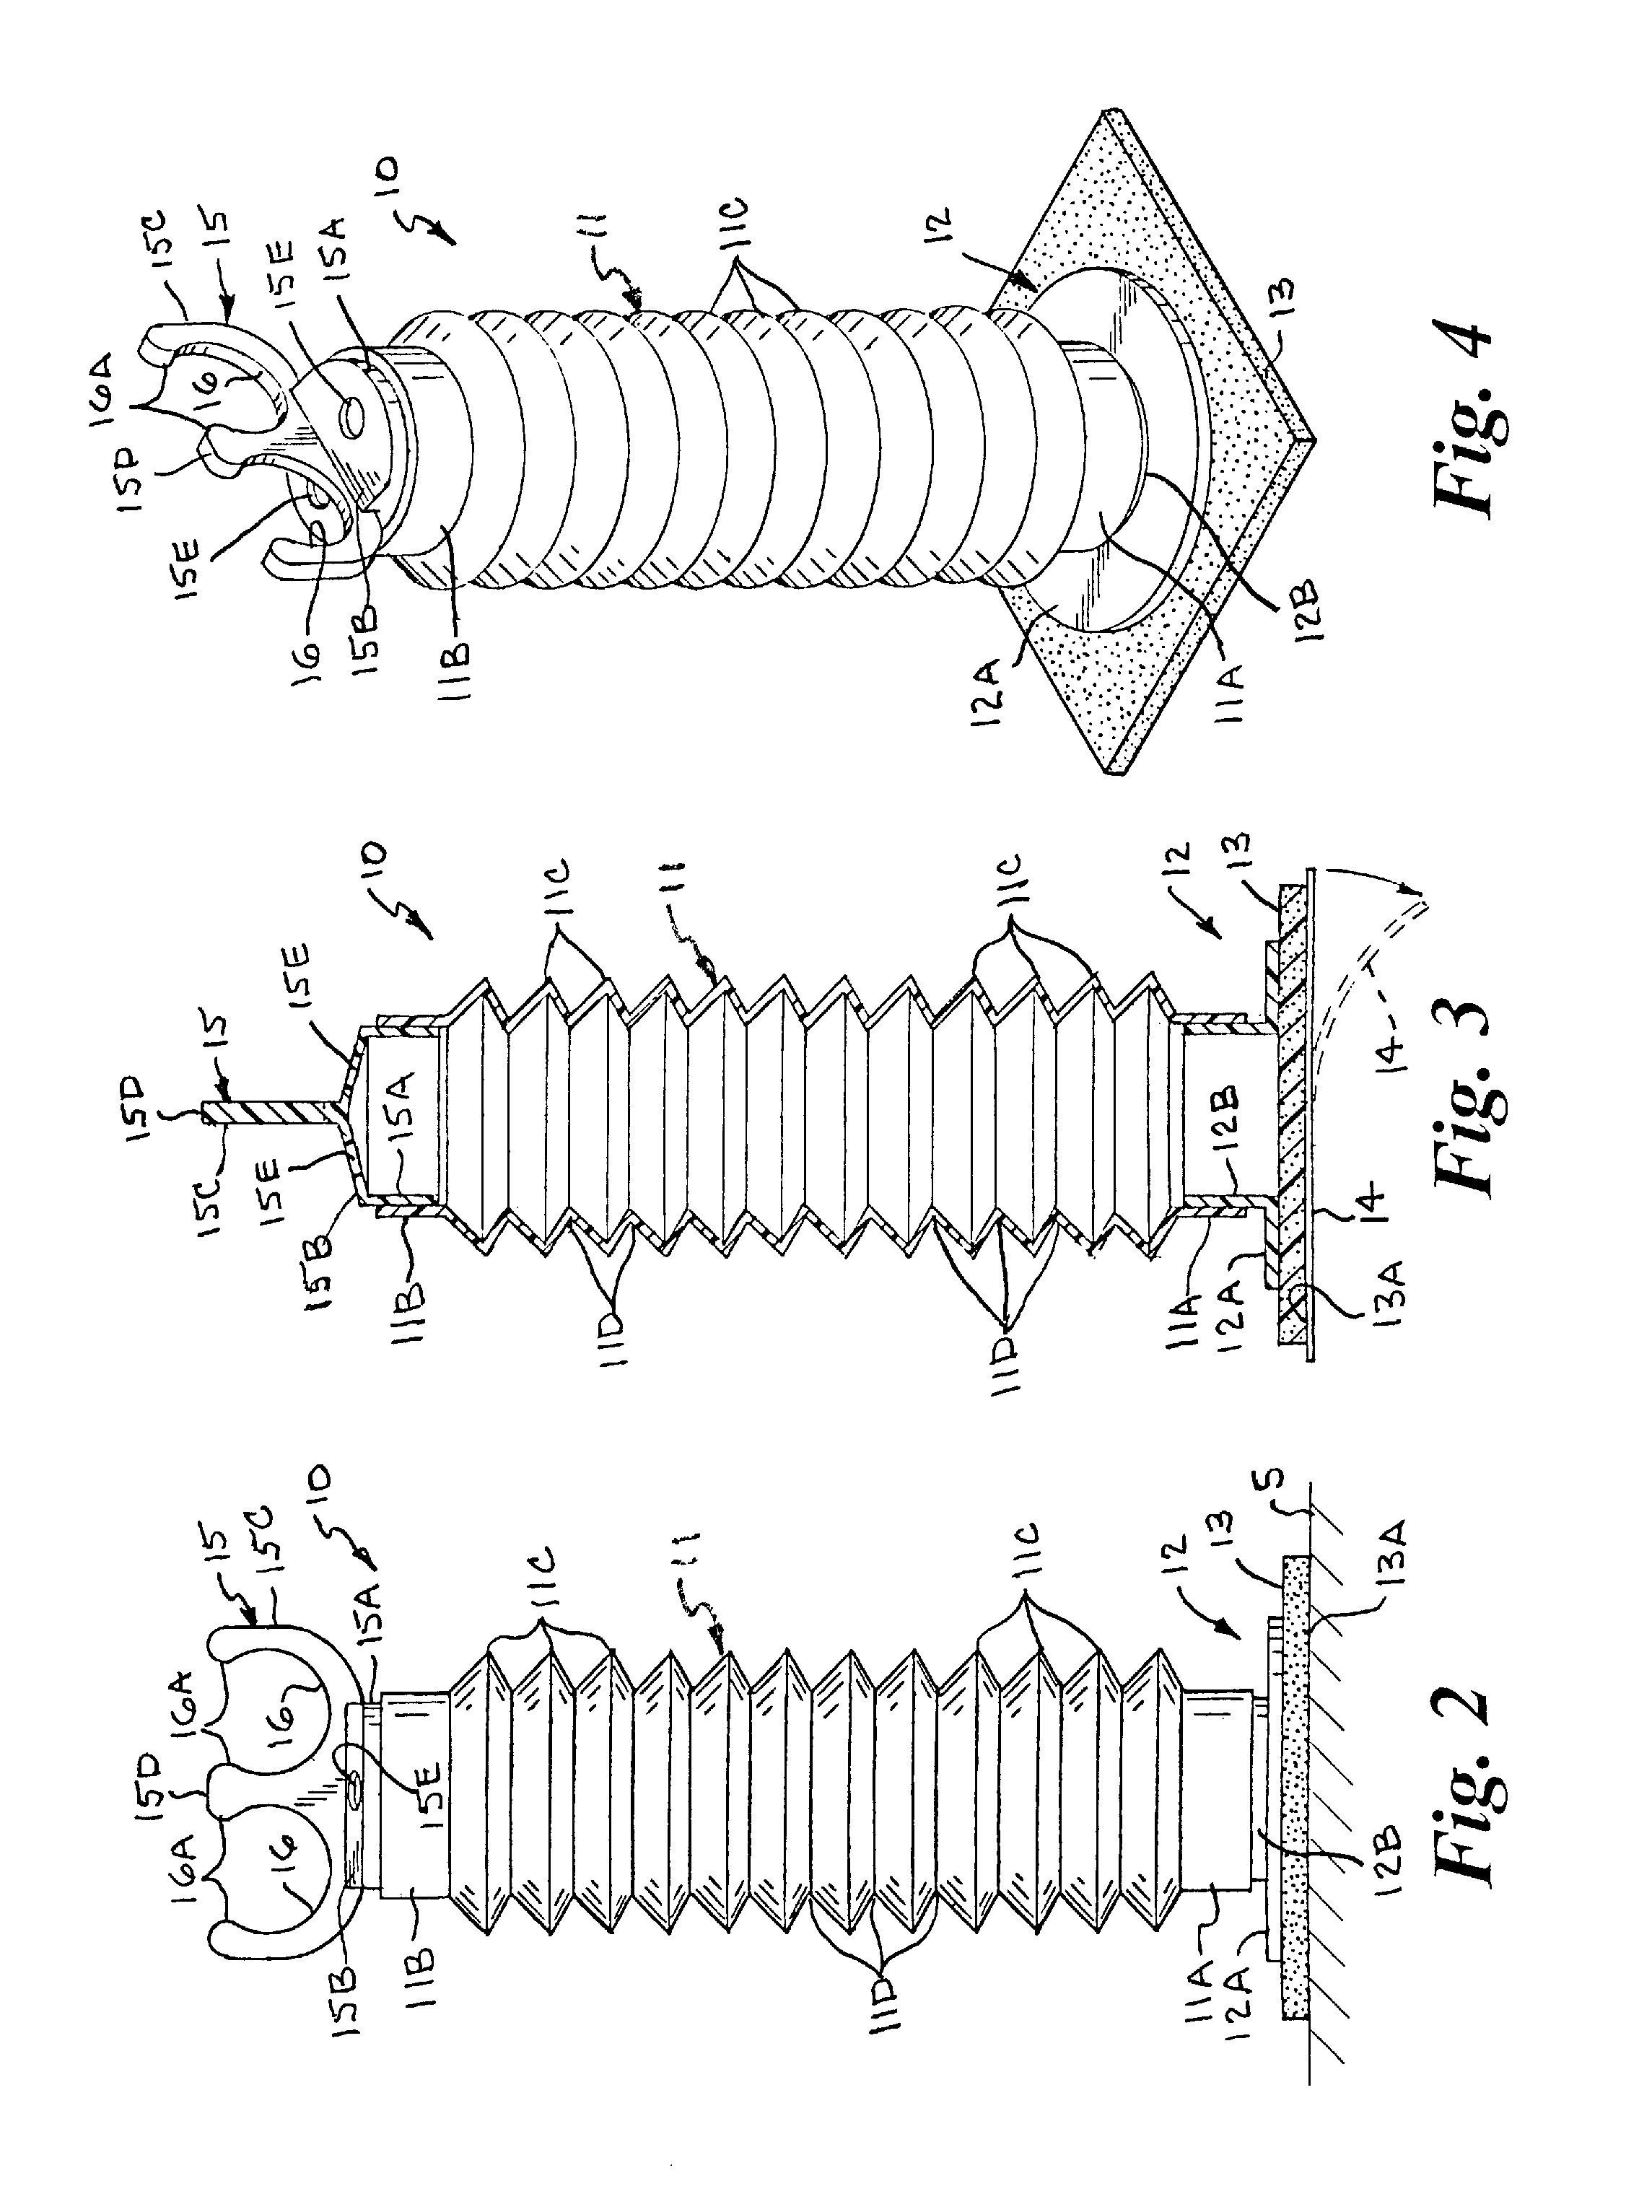 Anesthesia breathing circuit tube support